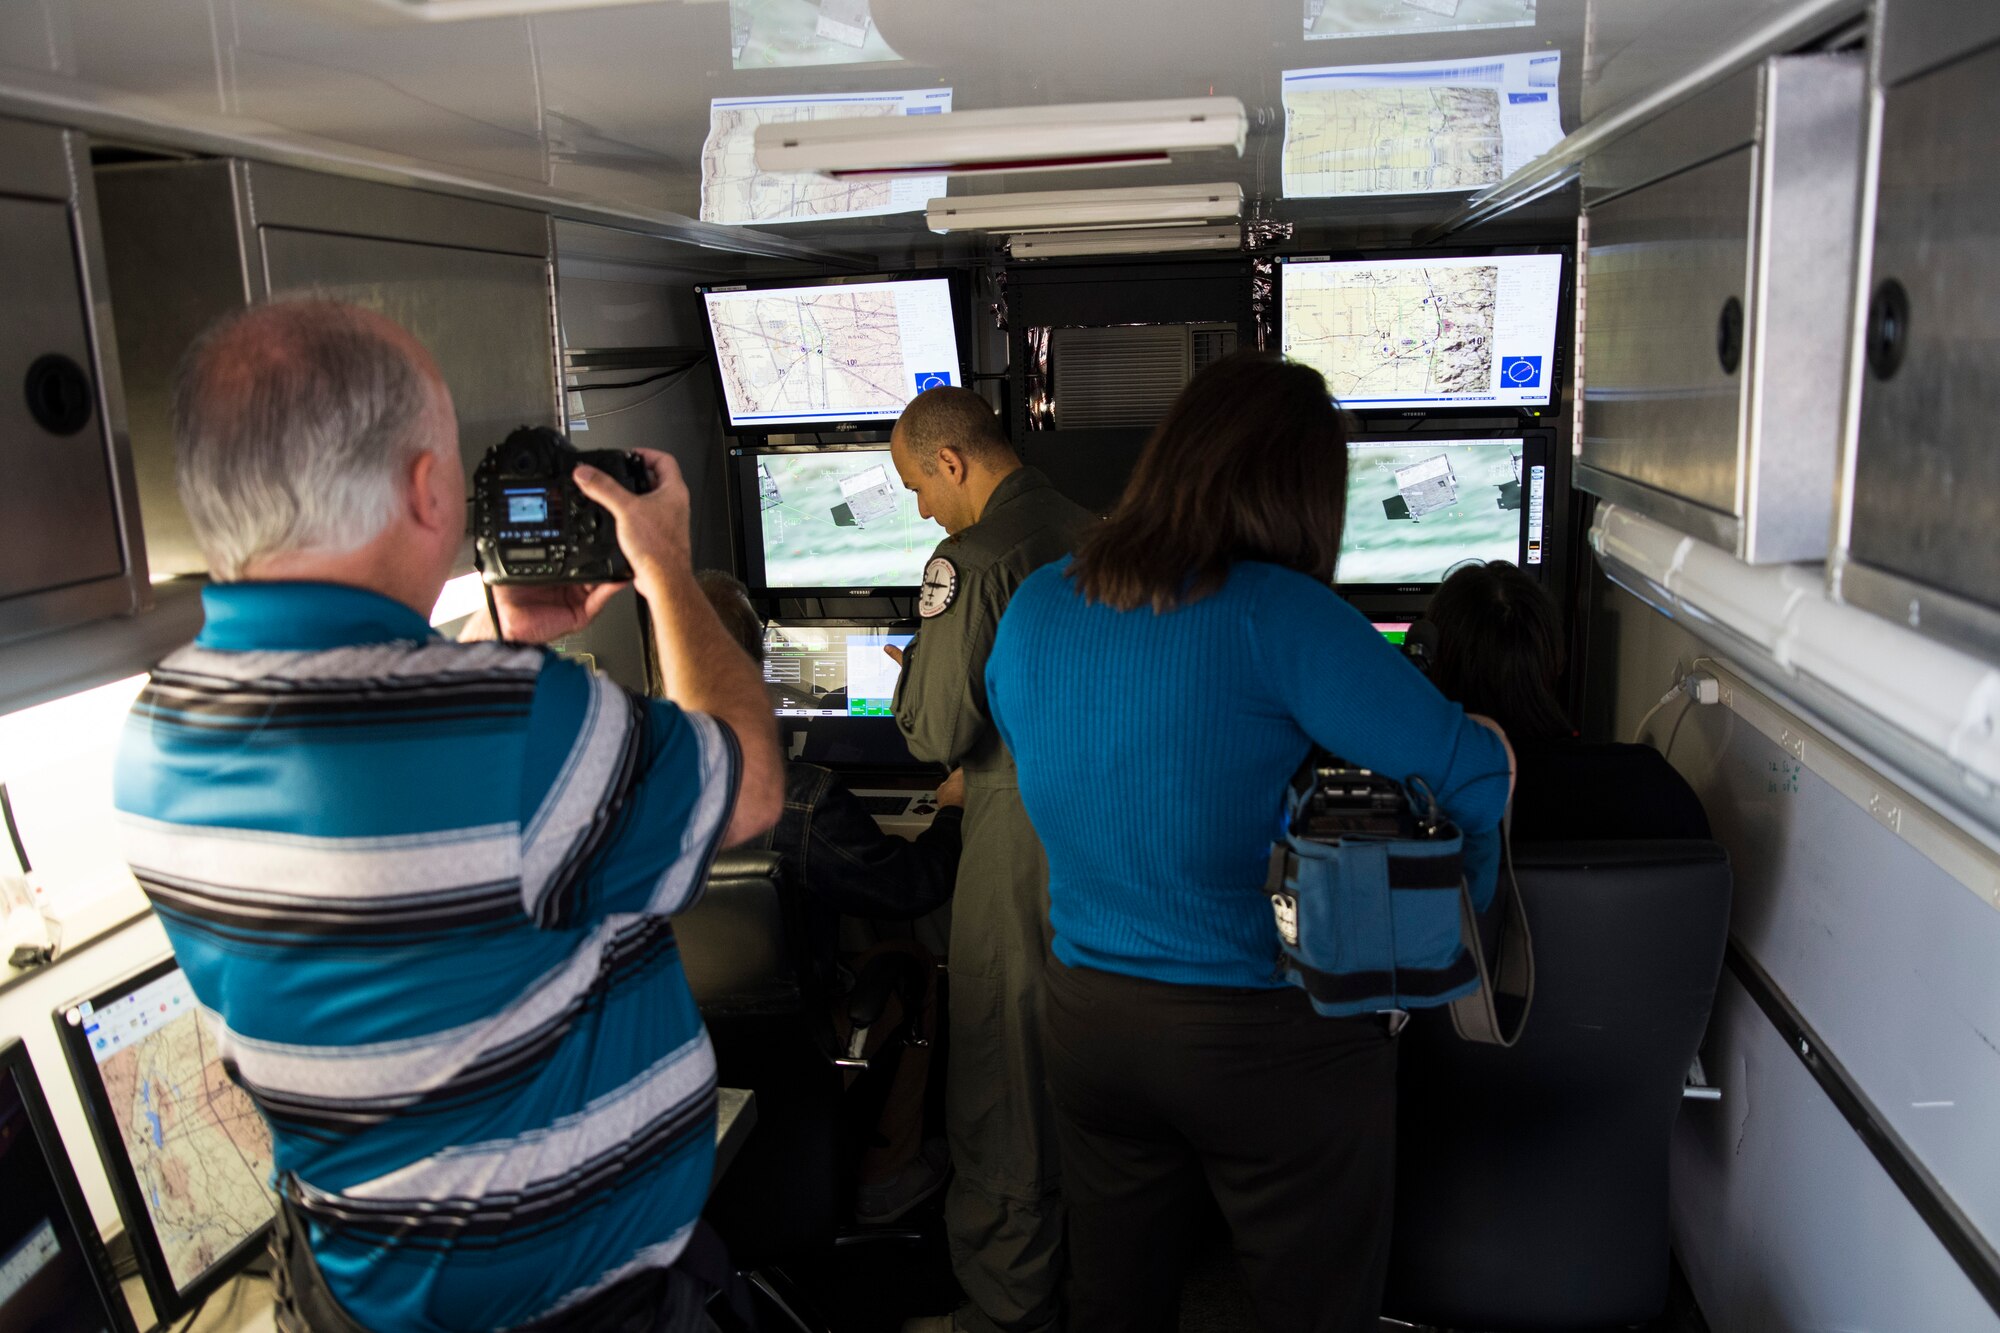 Members of the local media experience flying a remotely piloted aircraft in the 188th Wing’s RPA simulator, Sept. 29, 2016, at Ebbing Air National Guard Base, Fort Smith, Ark. Prior to viewing the simulator, the local media was informed of the activation of its RPA, intelligence analysis and targeting missions. (U.S. Air National Guard photo by Tech. Sgt. Chauncey Reed)